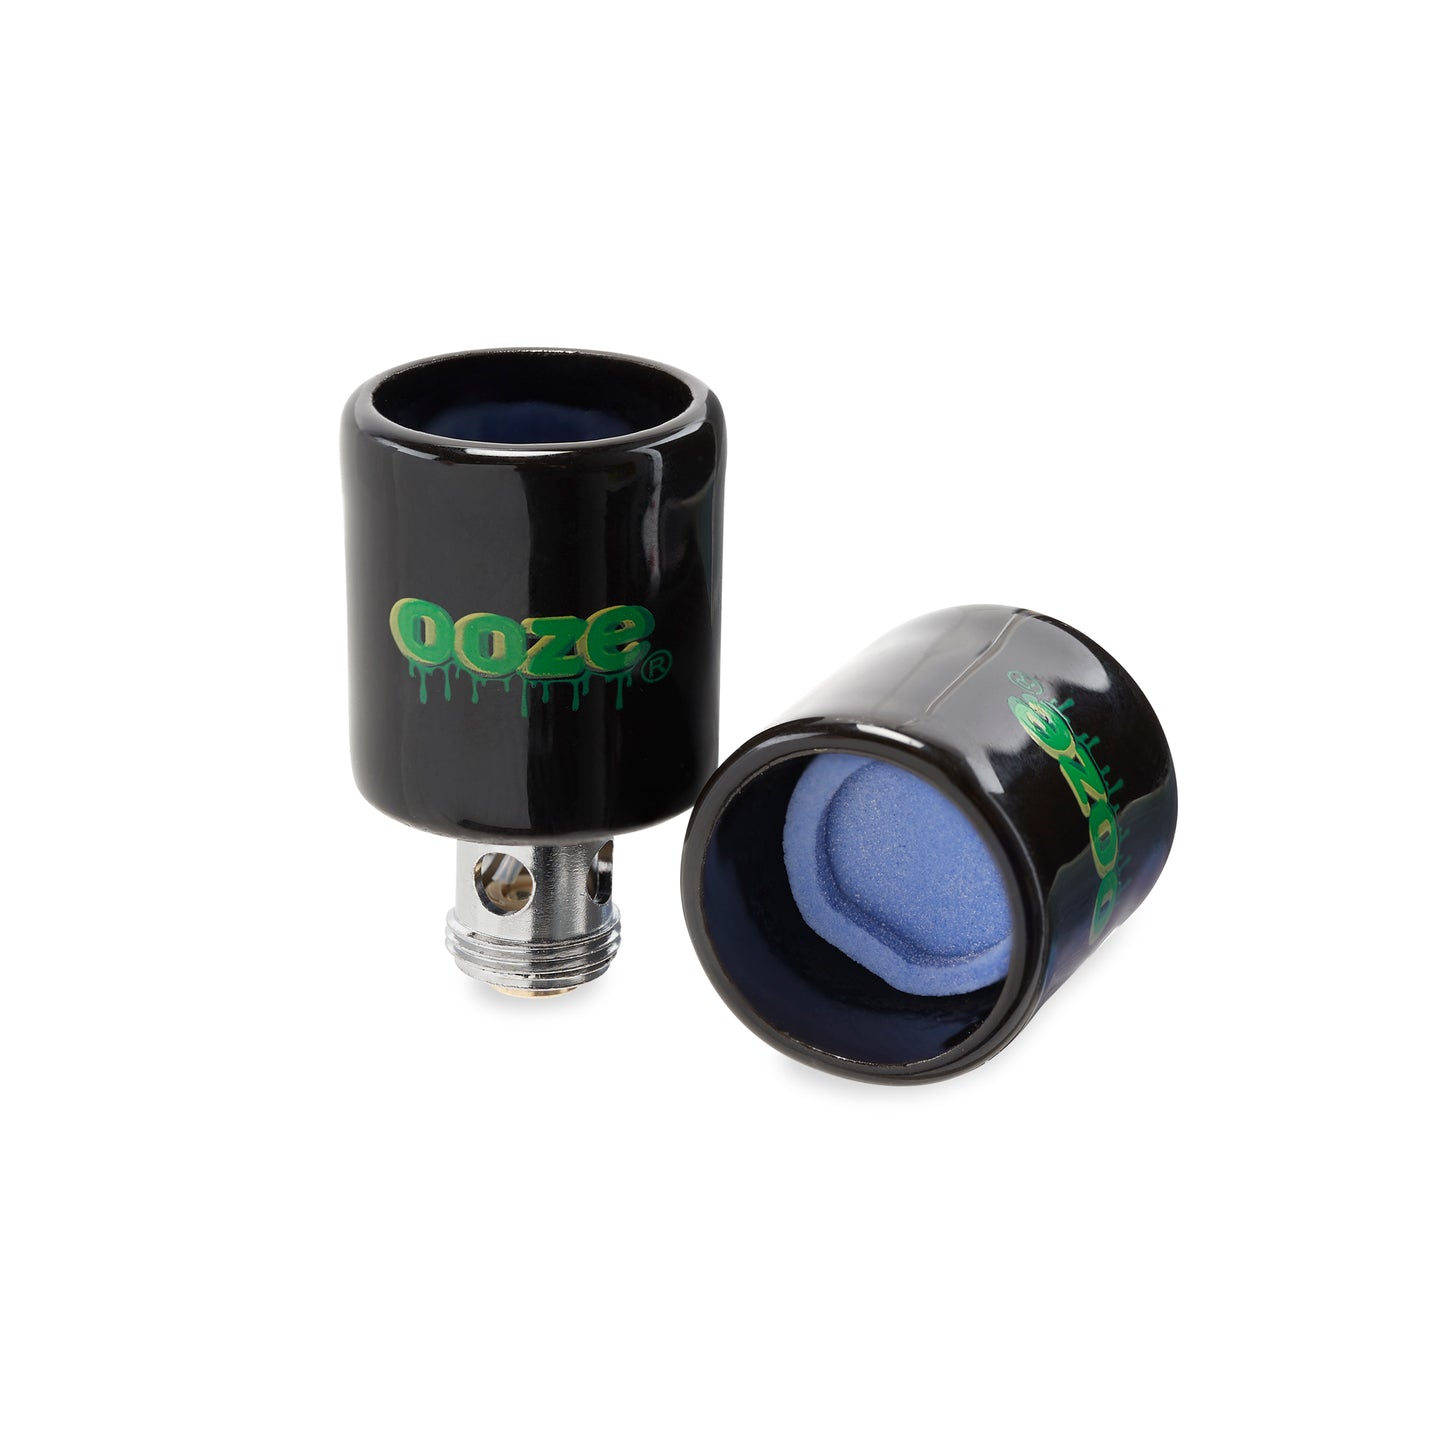 Booster Onyx Atomizer Replacement 2-Pack